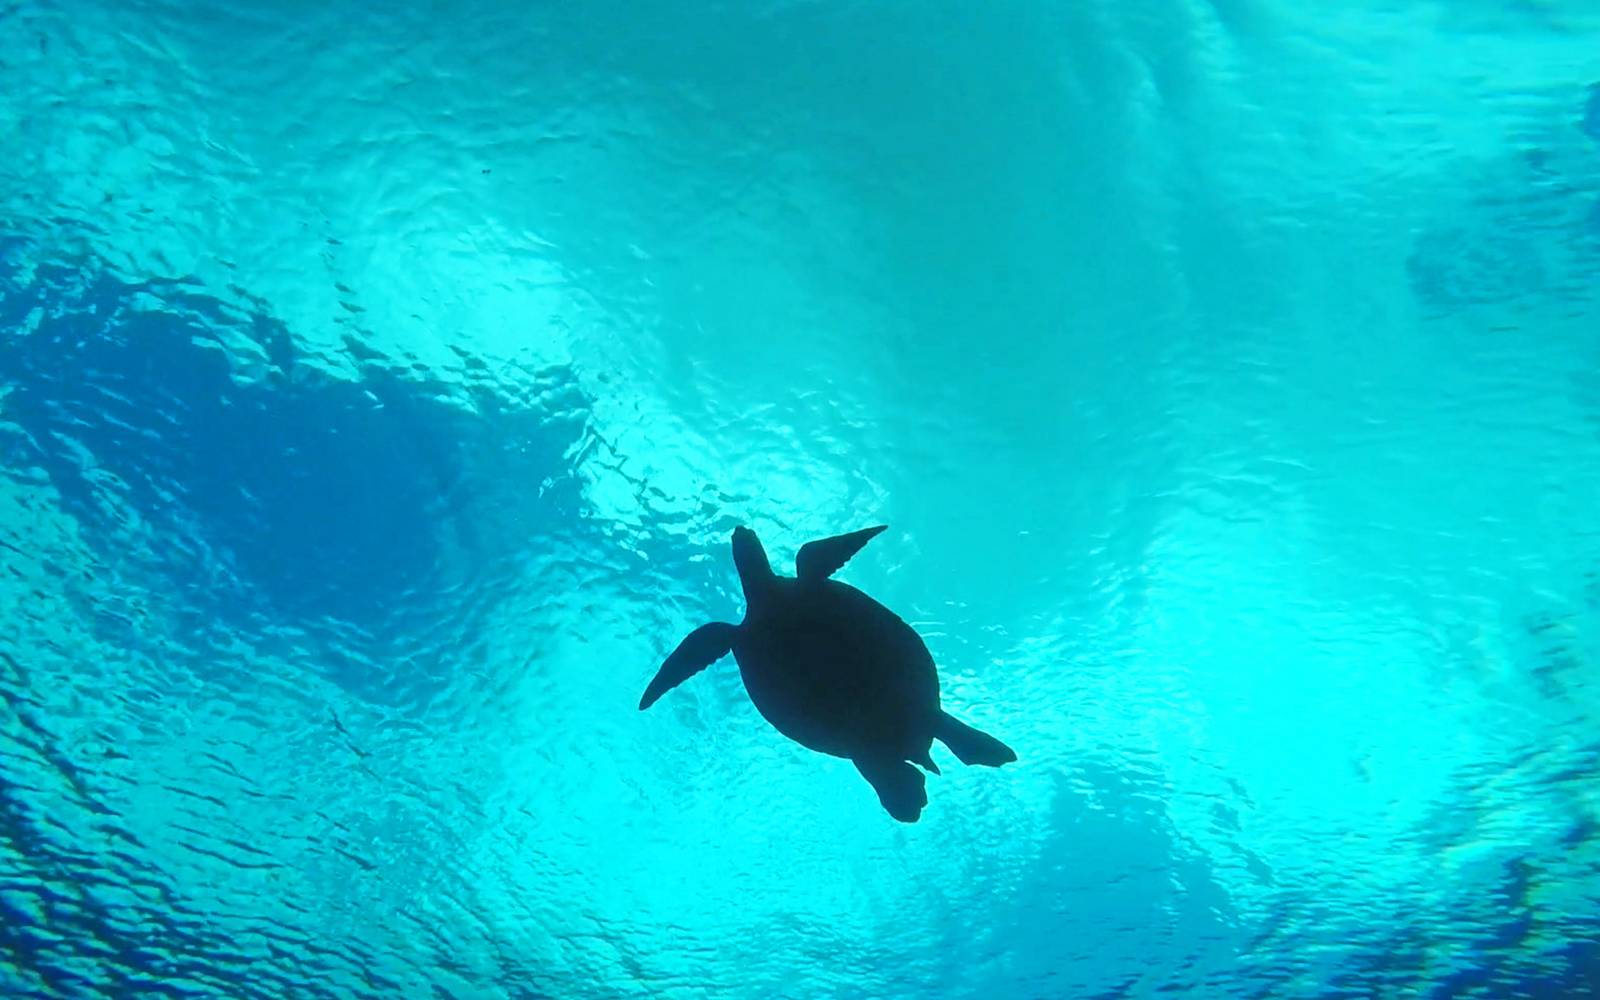 Tips For Snorkeling With Sea Turtles in Maui